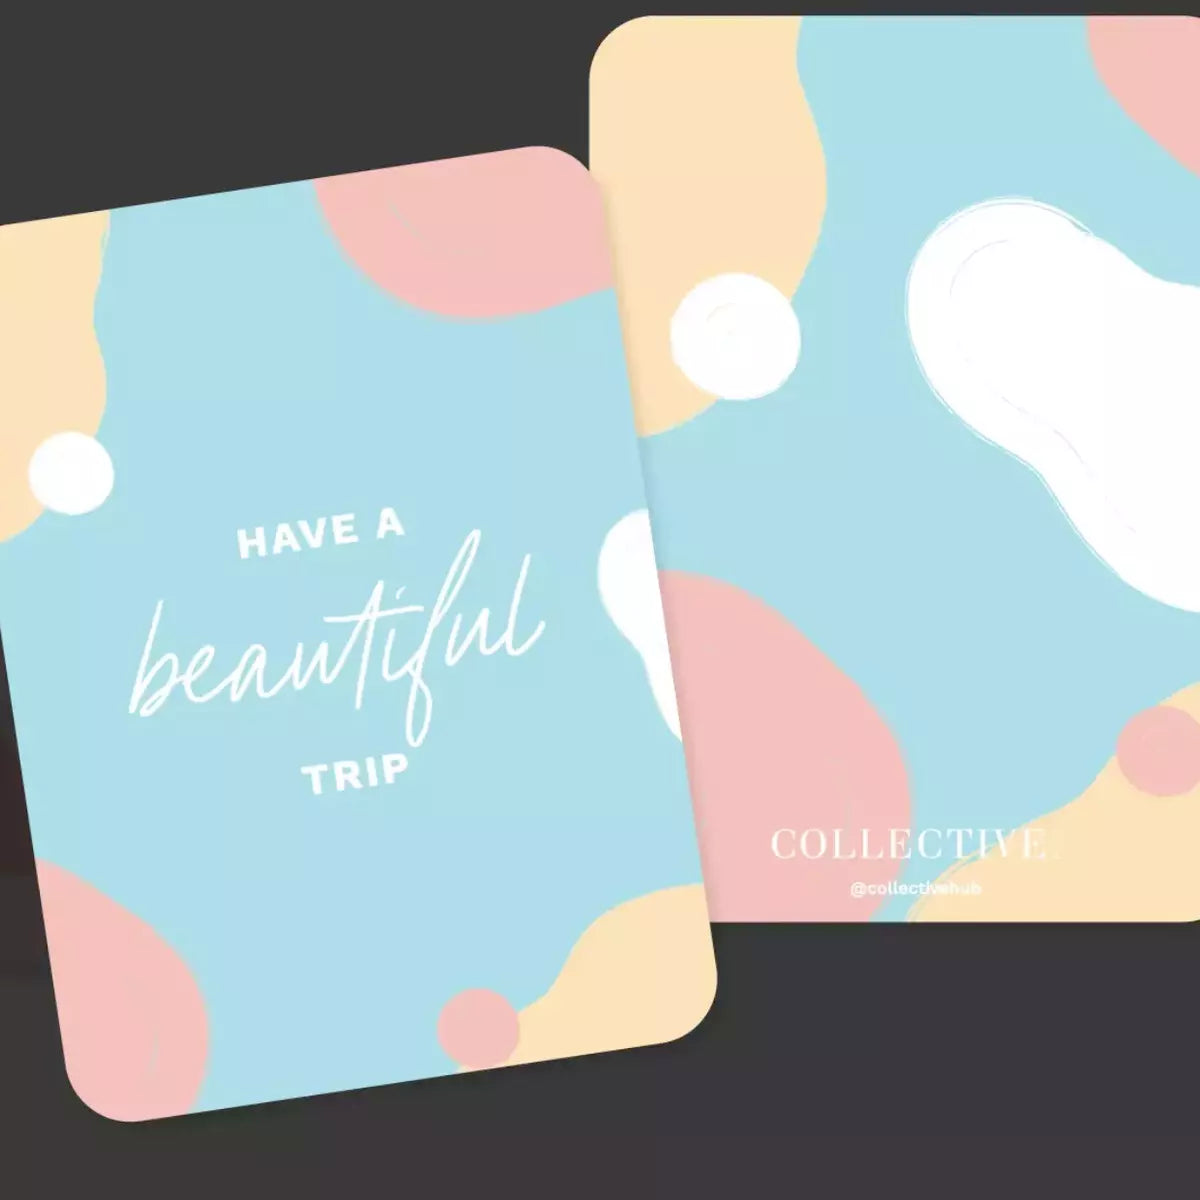 Brighten your trip with Collective Hub's beautifully designed Kindness Cards.